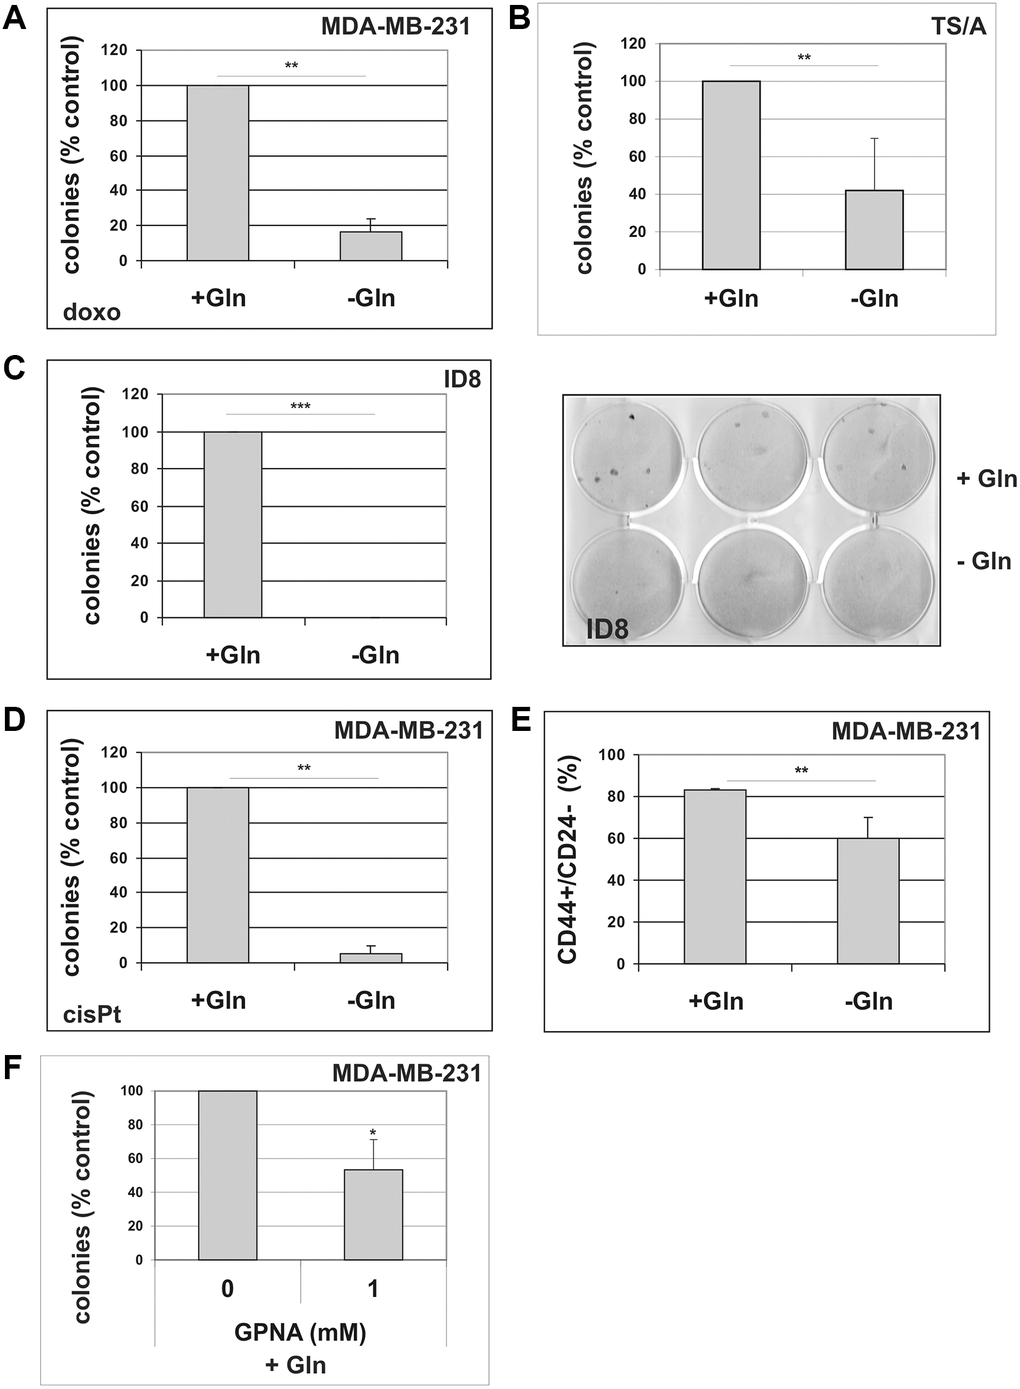 The effect of glutamine deprivation on TIS escape. (A) Doxorubicin-induced senescent MDA-MB-231 cells were grown in the presence or in the absence of glutamine. Colonies that evaded the senescent growth arrest were counted. Data are mean ± S.D. of three independent experiments. (B) Doxorubicin-induced senescent TS/A cells were grown in the presence or in the absence of glutamine. Colonies that evaded the senescent growth arrest were stained and counted. Data are mean ± S.D. of three independent experiments. (C) Doxorubicin-induced senescent ID8 cells were grown in the presence or in the absence of glutamine. A representative image of a colony escape assay in ID8 cells is shown. Colonies that evaded the senescent growth arrest were stained and counted. Data are mean ± S.D. of three independent experiments. (D) CisPt-induced senescent MDA-MB-231 cells were grown in the presence or in the absence of glutamine. Colonies that evaded the senescent growth arrest were counted. Data are mean ± S.D. of three independent experiments. (E) Effect of glutamine on CD44+/CD24− subpopulation. MDA-MB-231 cells were grown for 48 hours in the presence or in the absence of glutamine. Expression of CD44 and CD24 was analyzed by flow cytometry. Data are mean ± S.D. of three independent experiments. (F) GPNA treatment abolishes escape from TIS. Doxorubicin-induced senescent MDA-MB-231 cells were grown in complete medium (+Gln), in the absence or in the presence of 1 mM GPNA. Colonies that evaded the senescent growth arrest were stained and counted. Data are mean ± S.D. of two independent experiments.